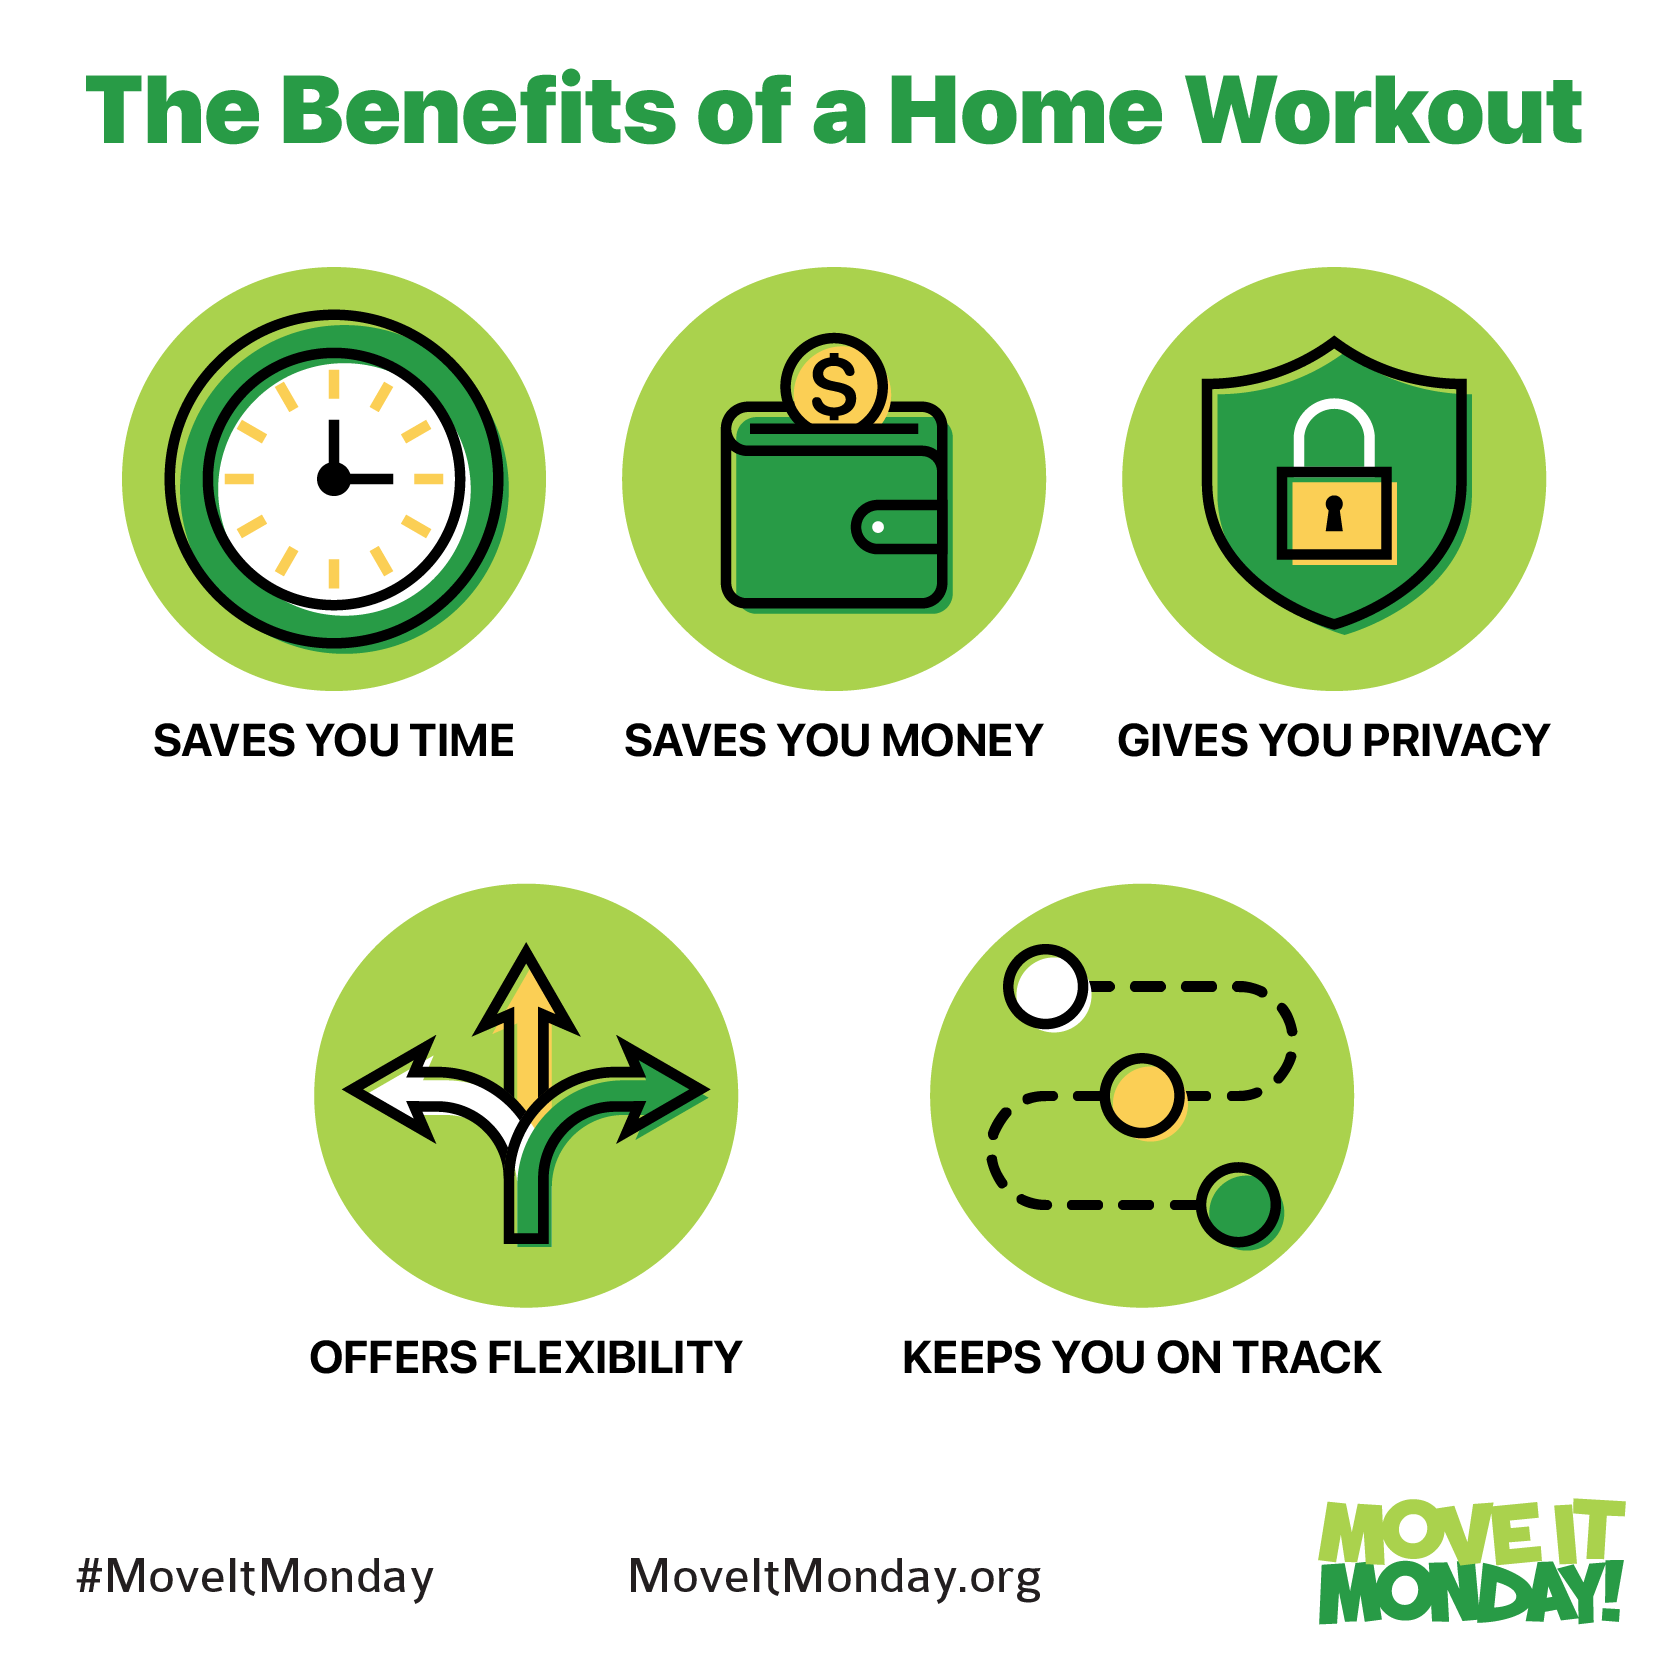 Here's How You Can Benefit from a Home Workout